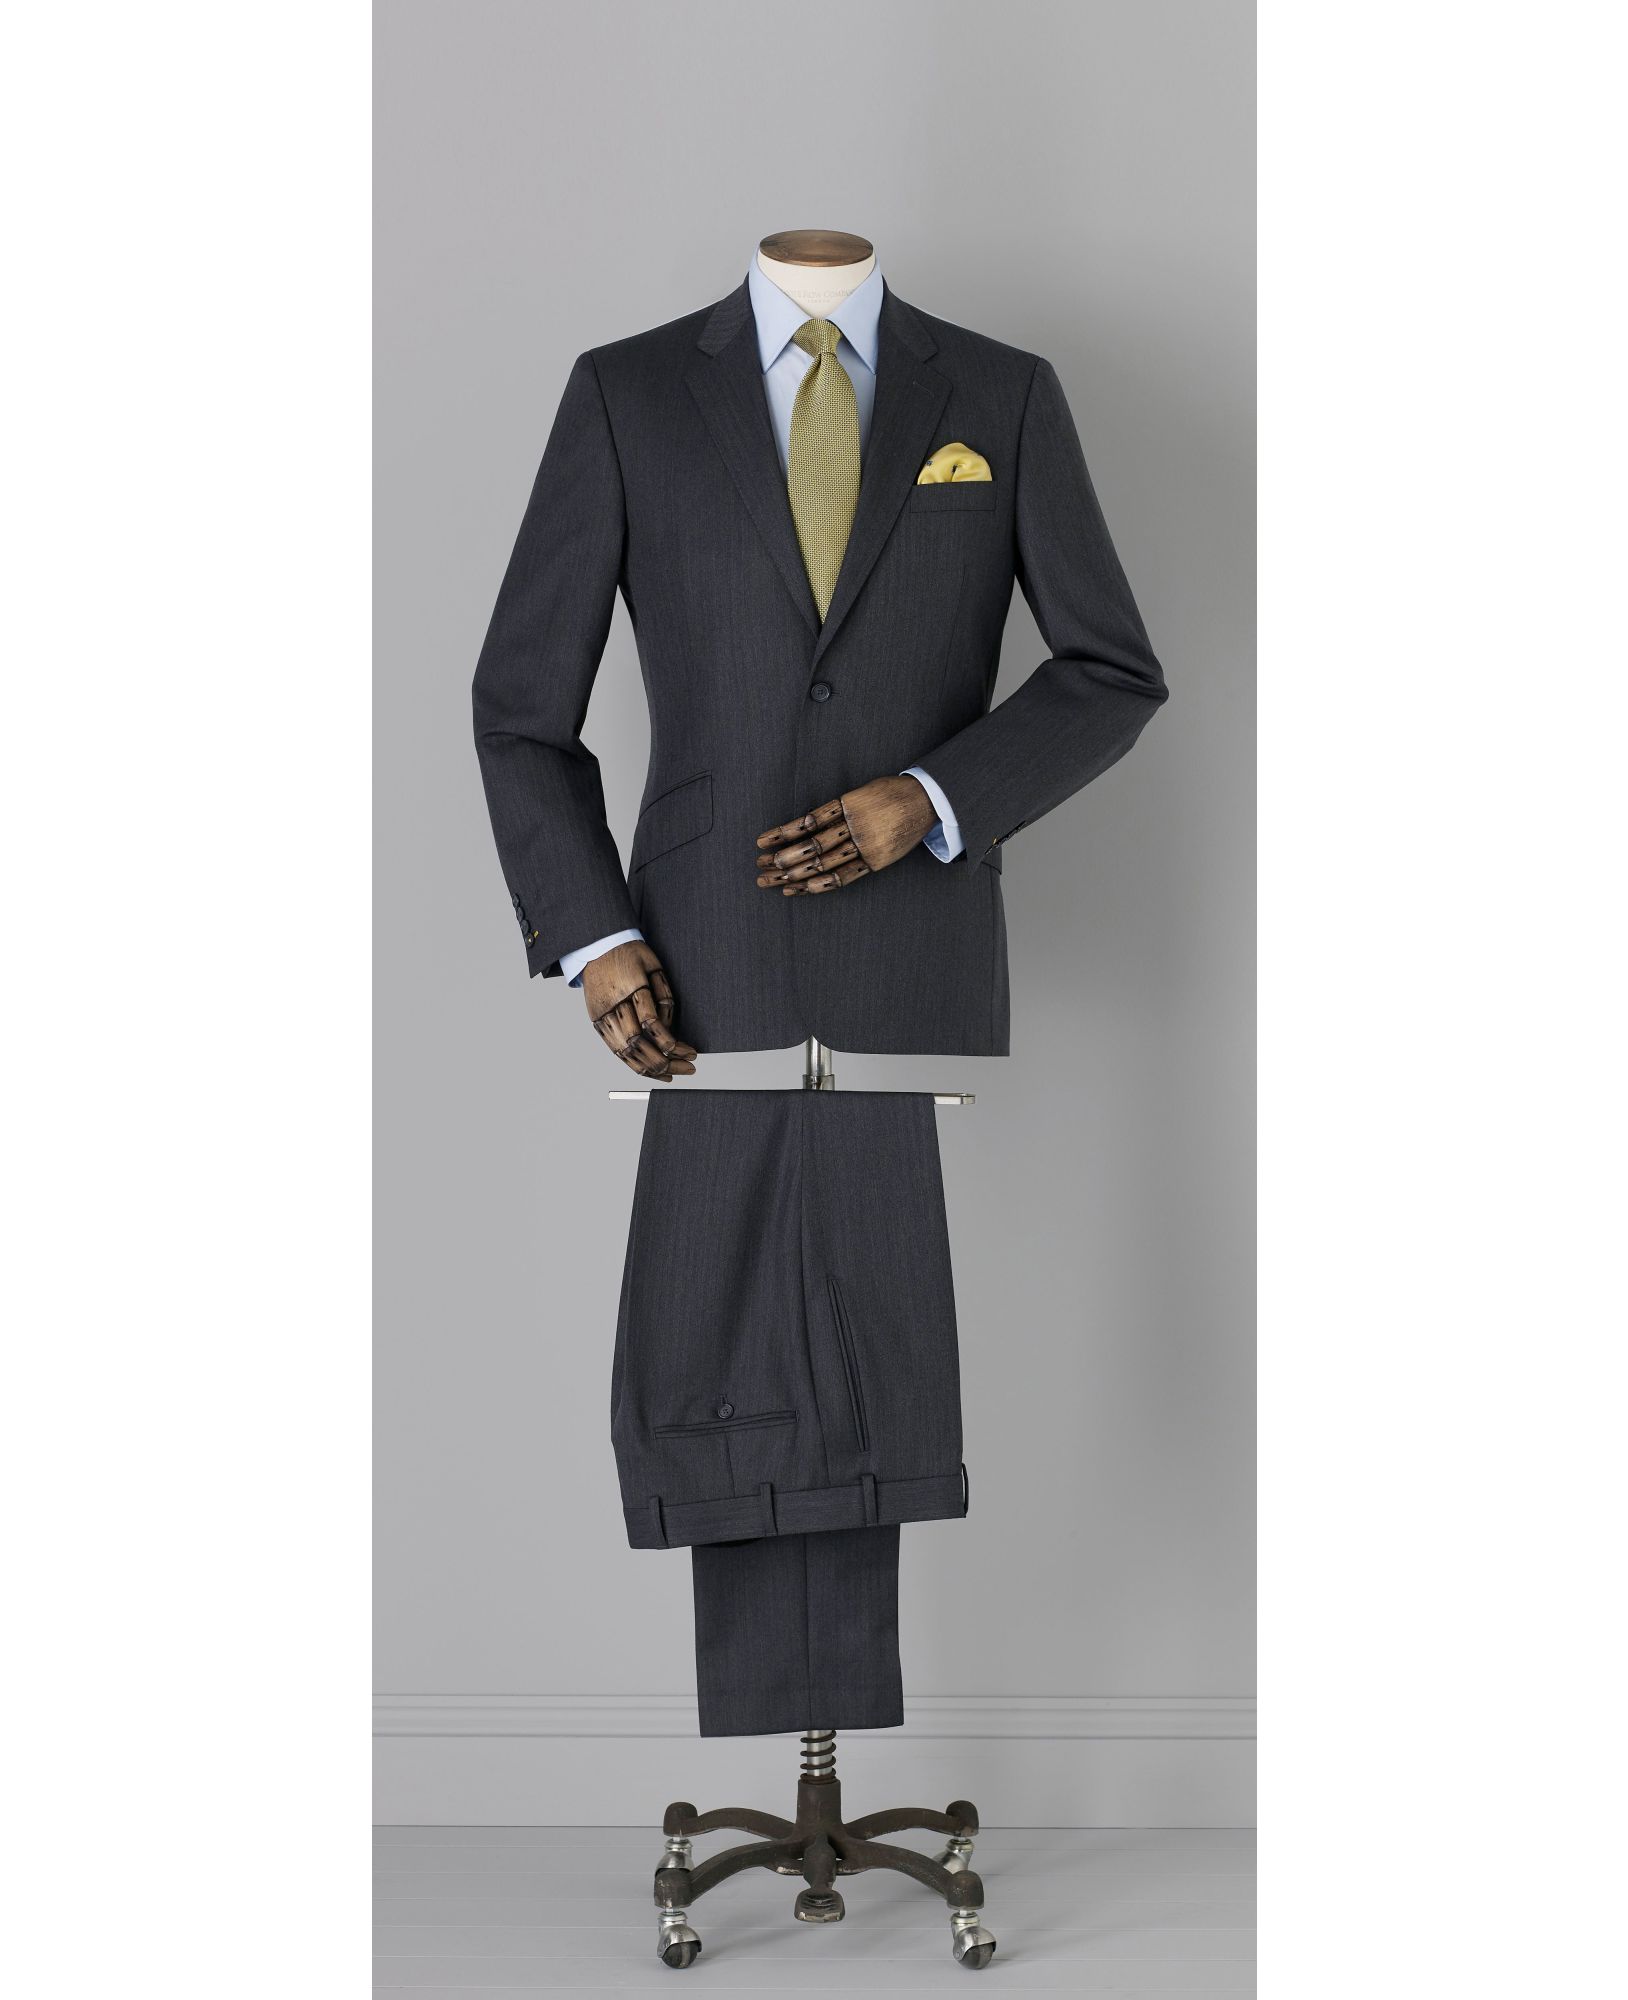 Limited Edition Grey Herringbone Tailored Business Suit by Savile Row Company